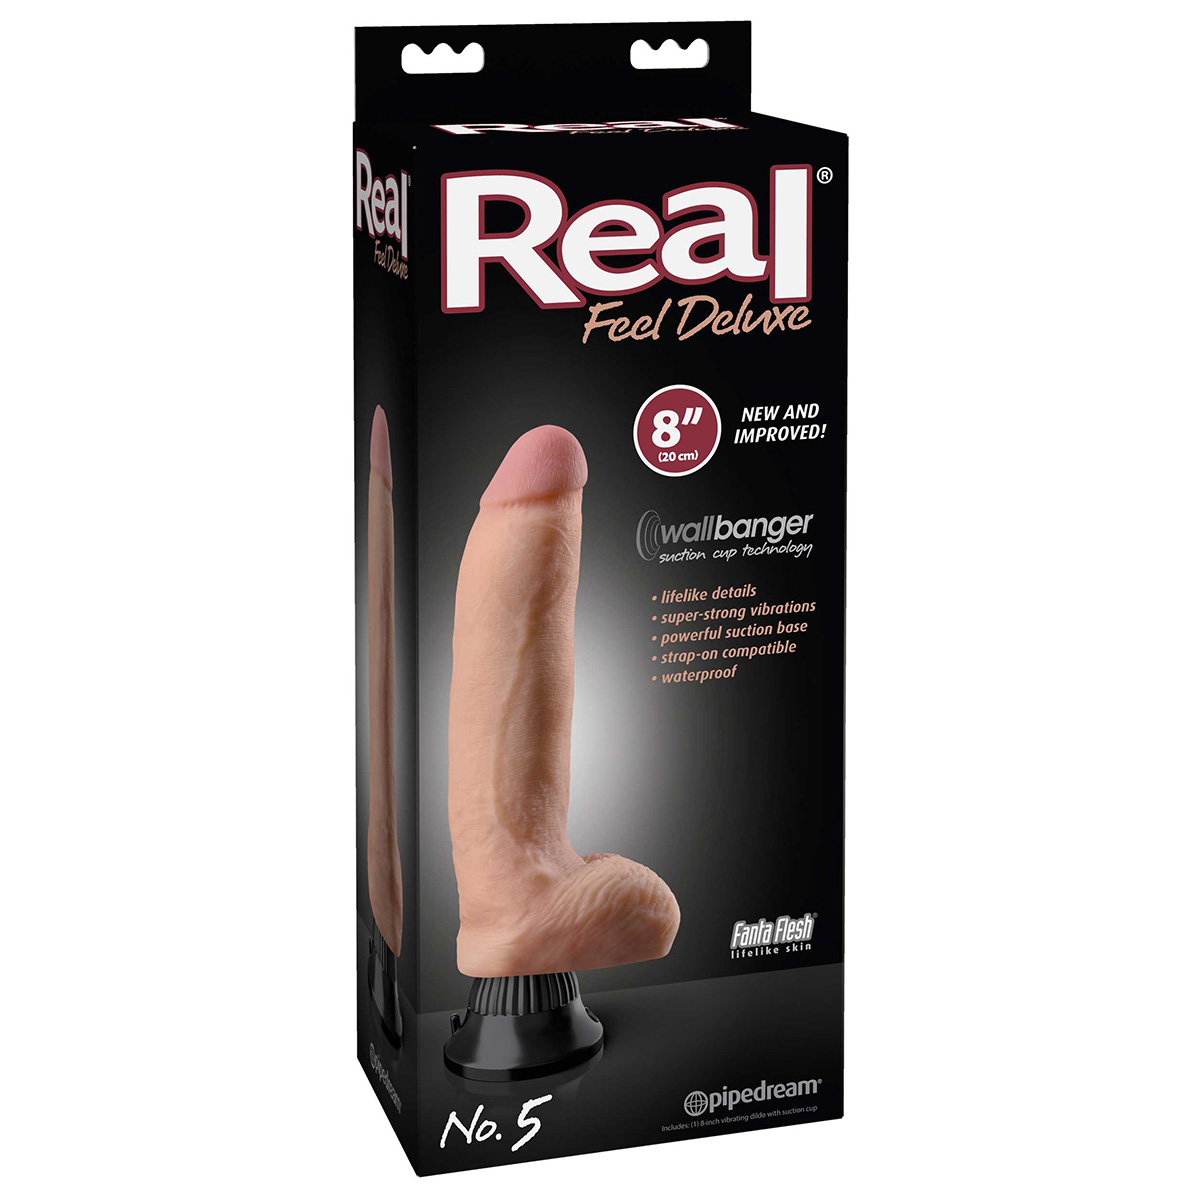     Real Feel Deluxe 8 No. 5 